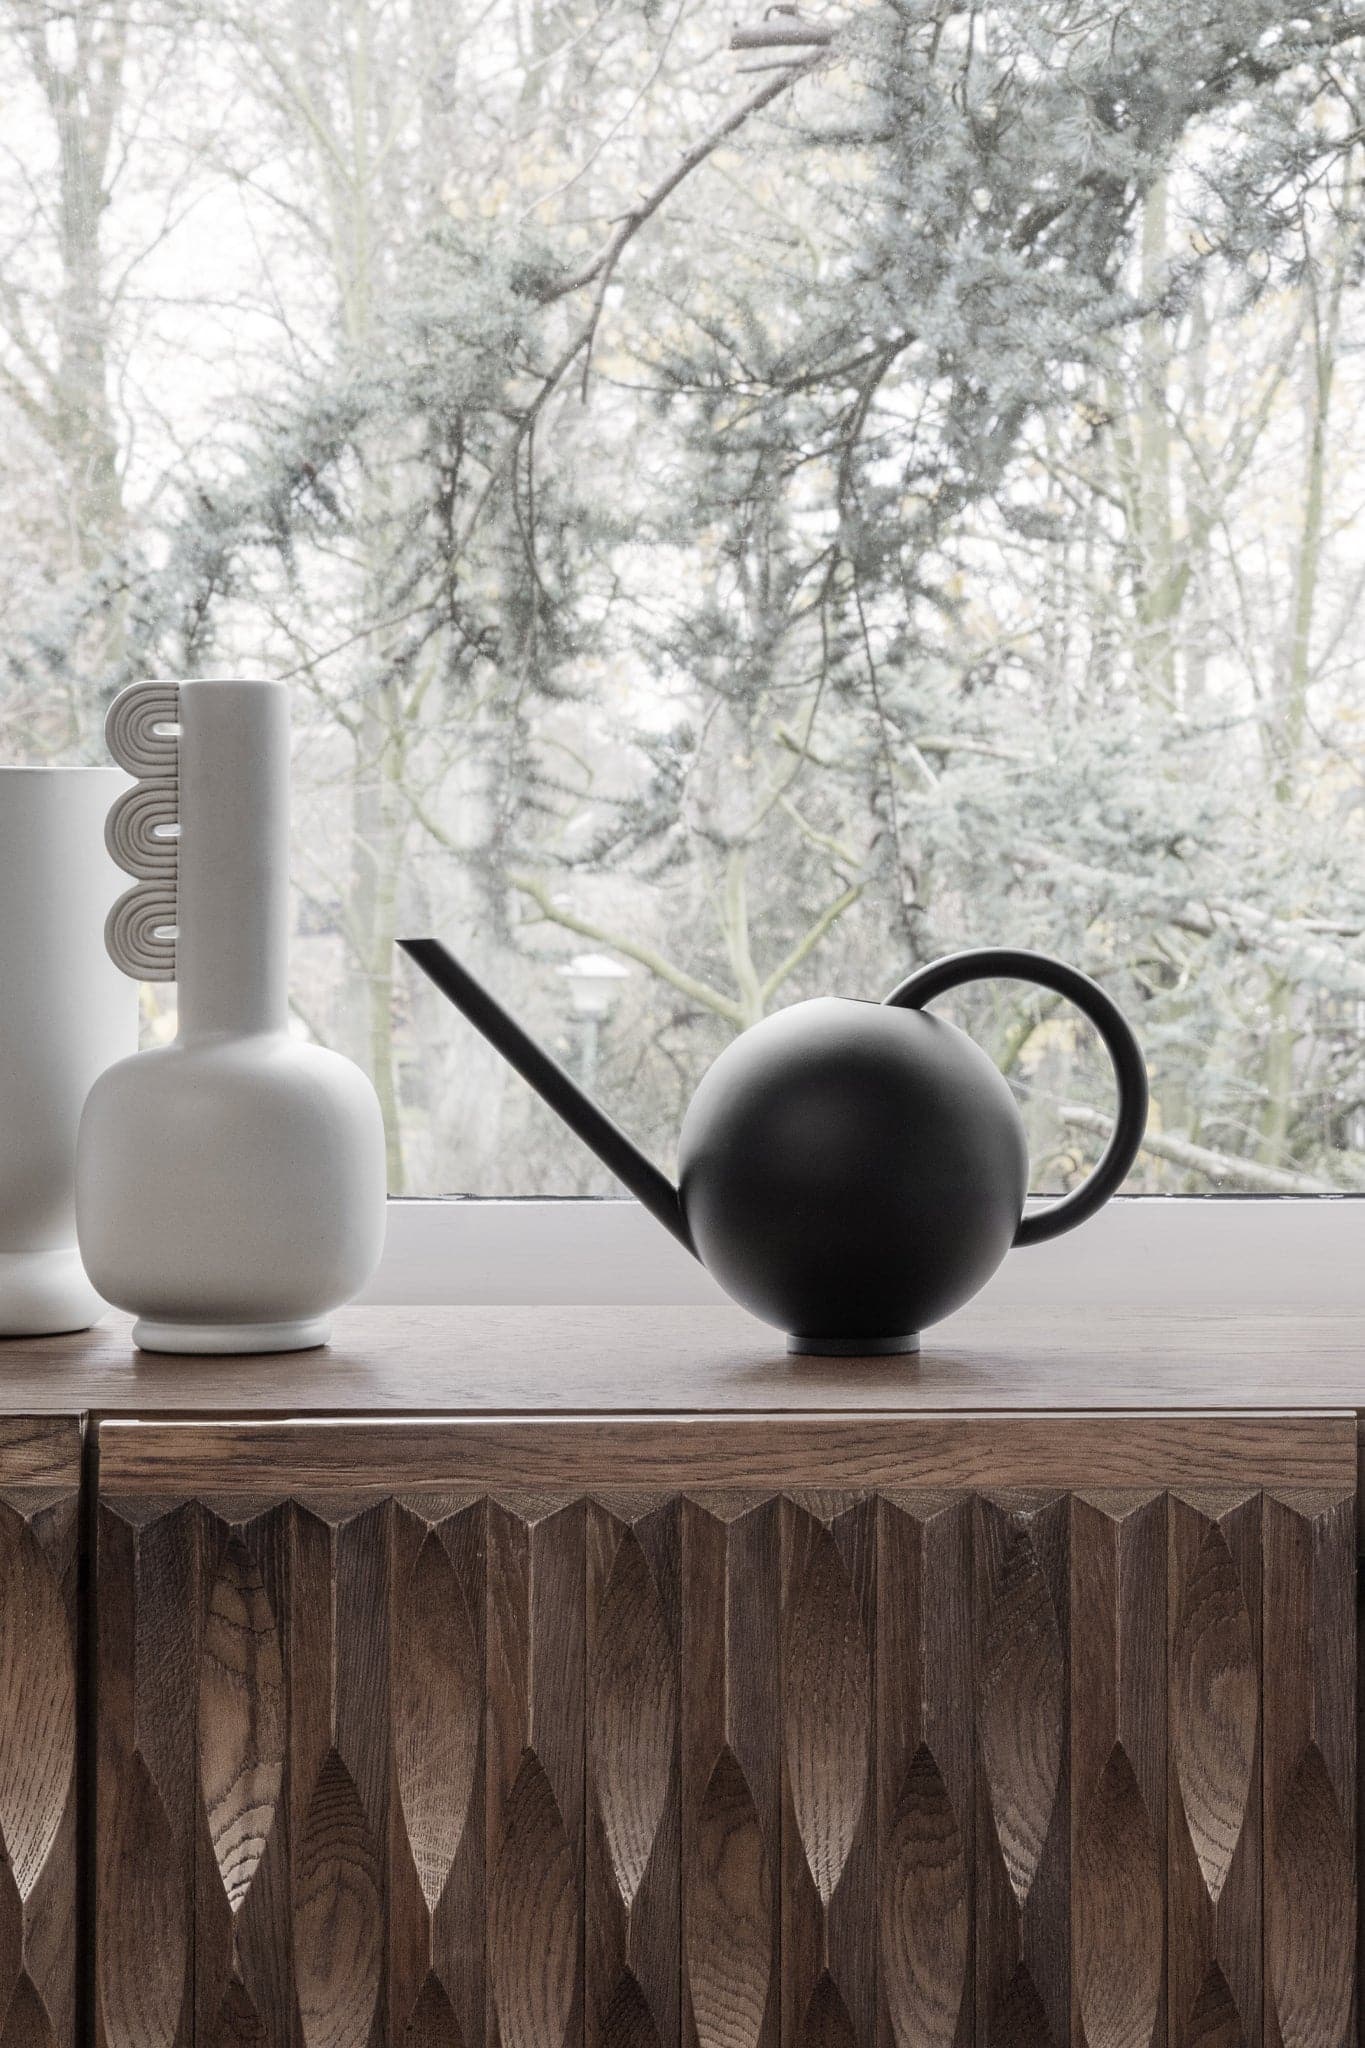 Ferm Living Orb Watering Can - Marz Designs AUFerm Living